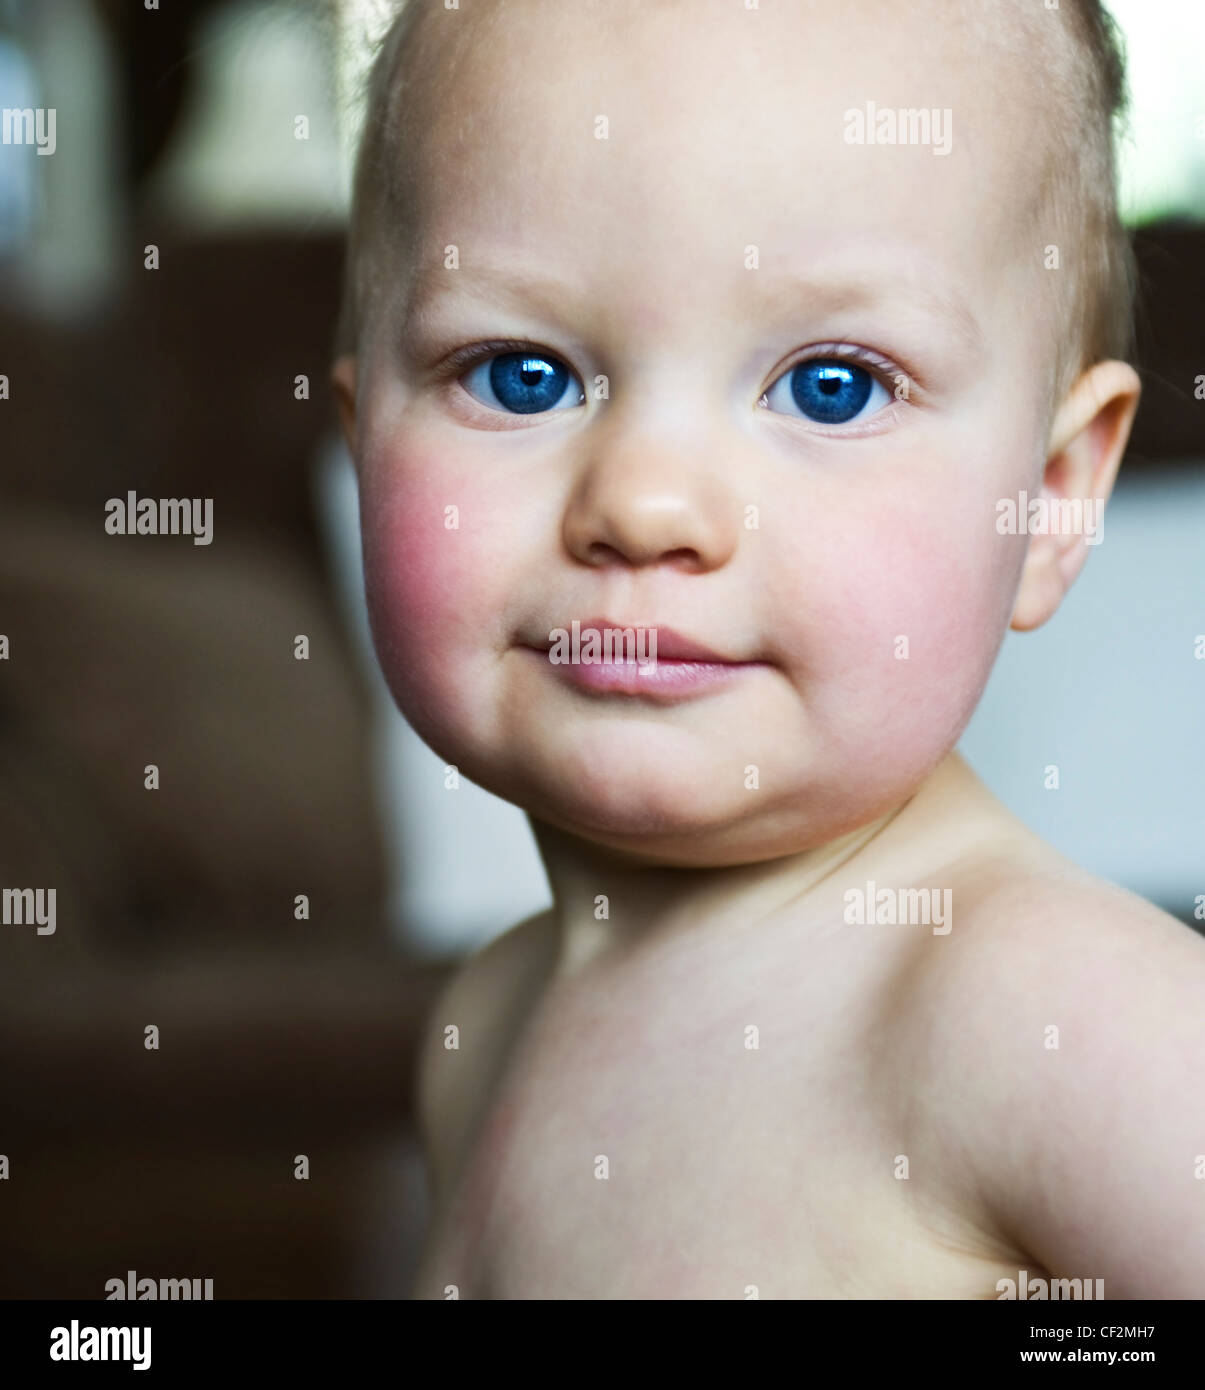 A one year old baby boy. Stock Photo